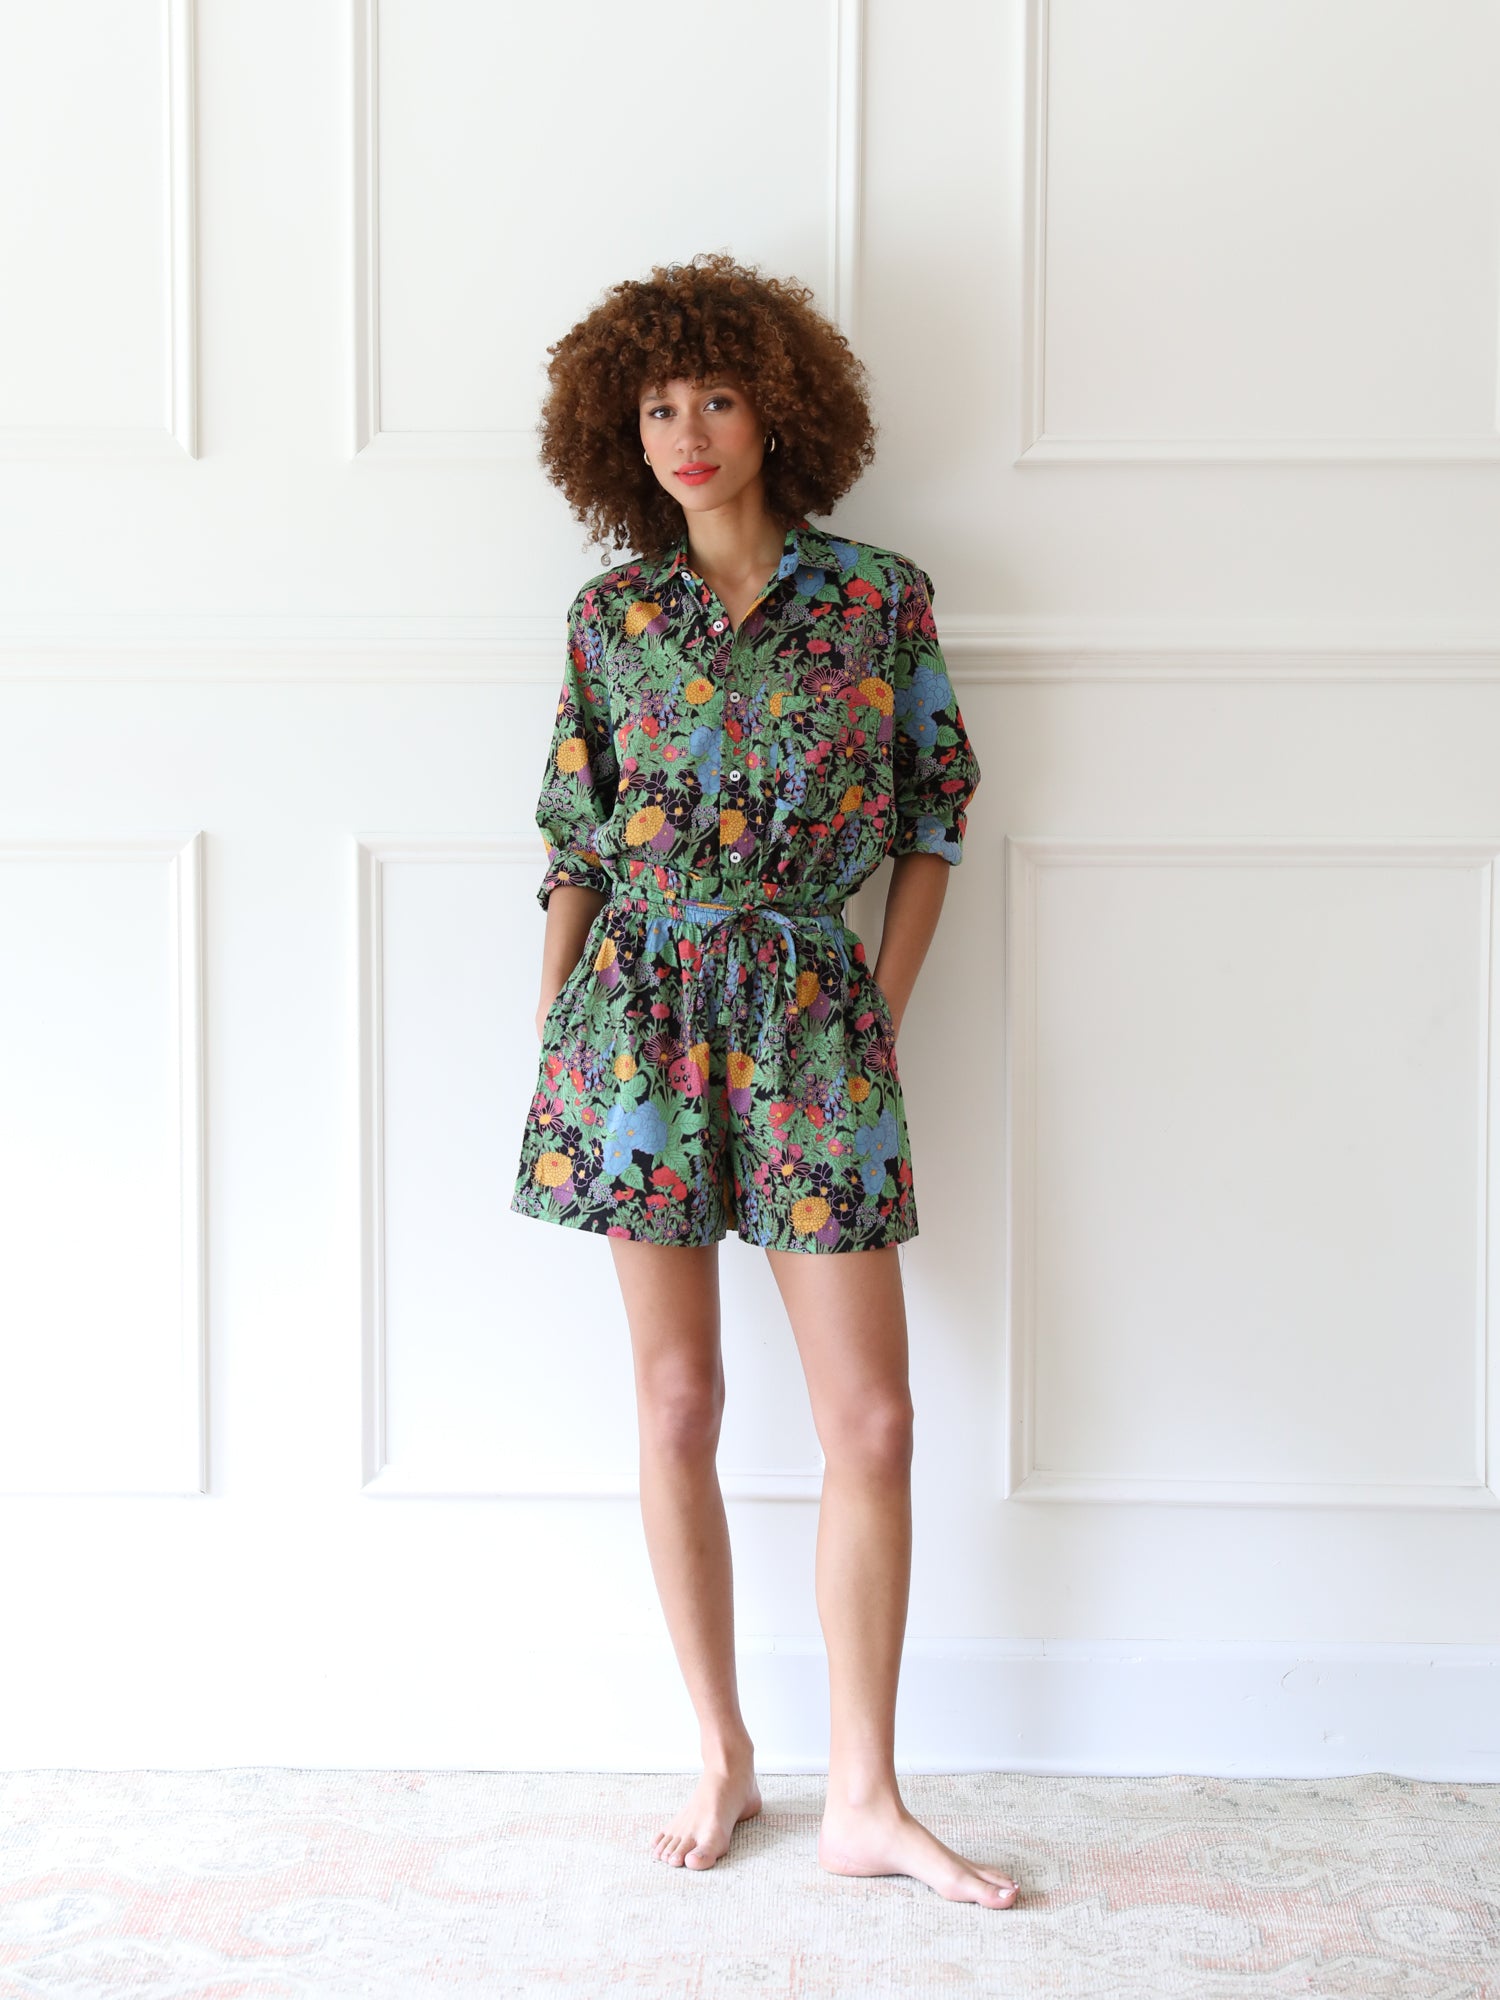 MILLE Clothing Cary Short in Botanica